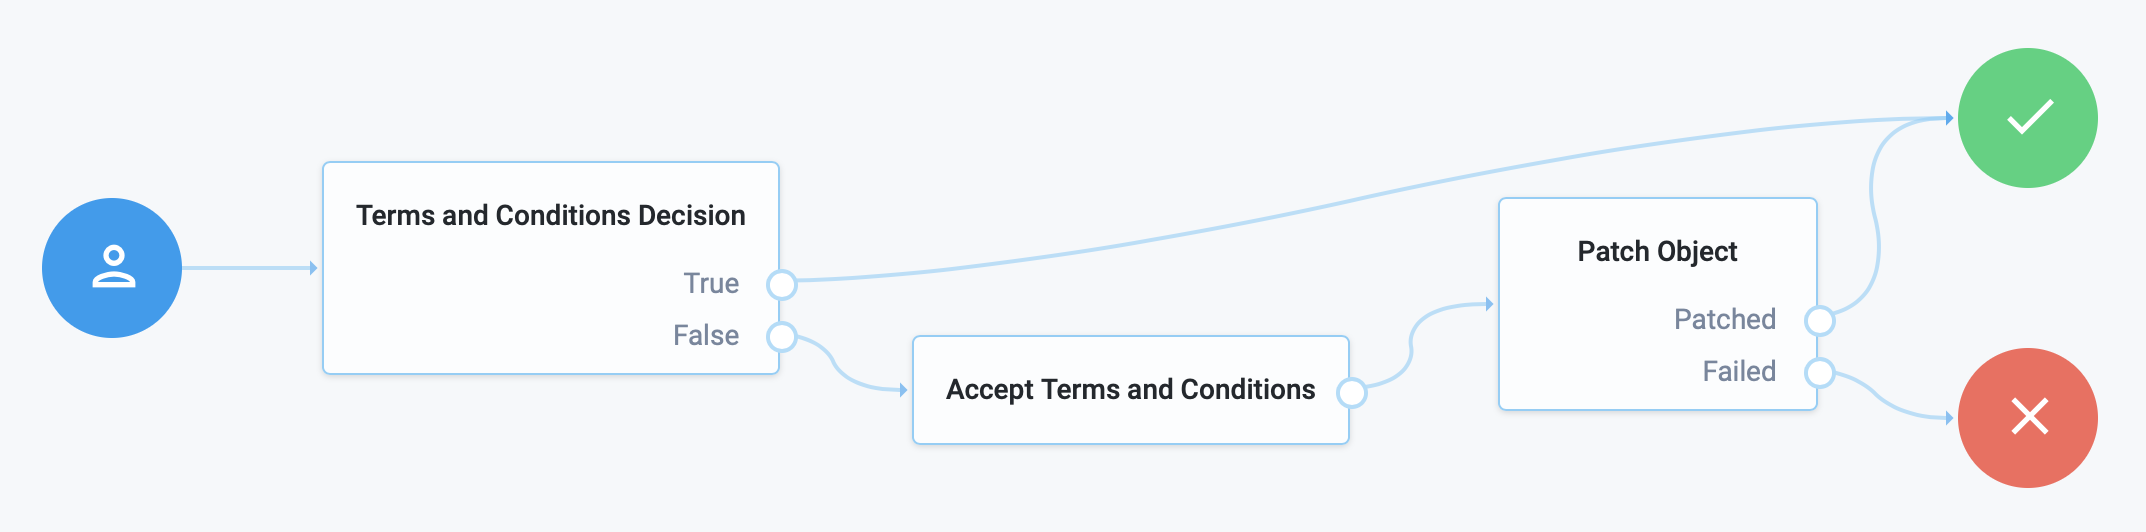 An Example authentication tree, showing Accept Terms and Conditions node usage.